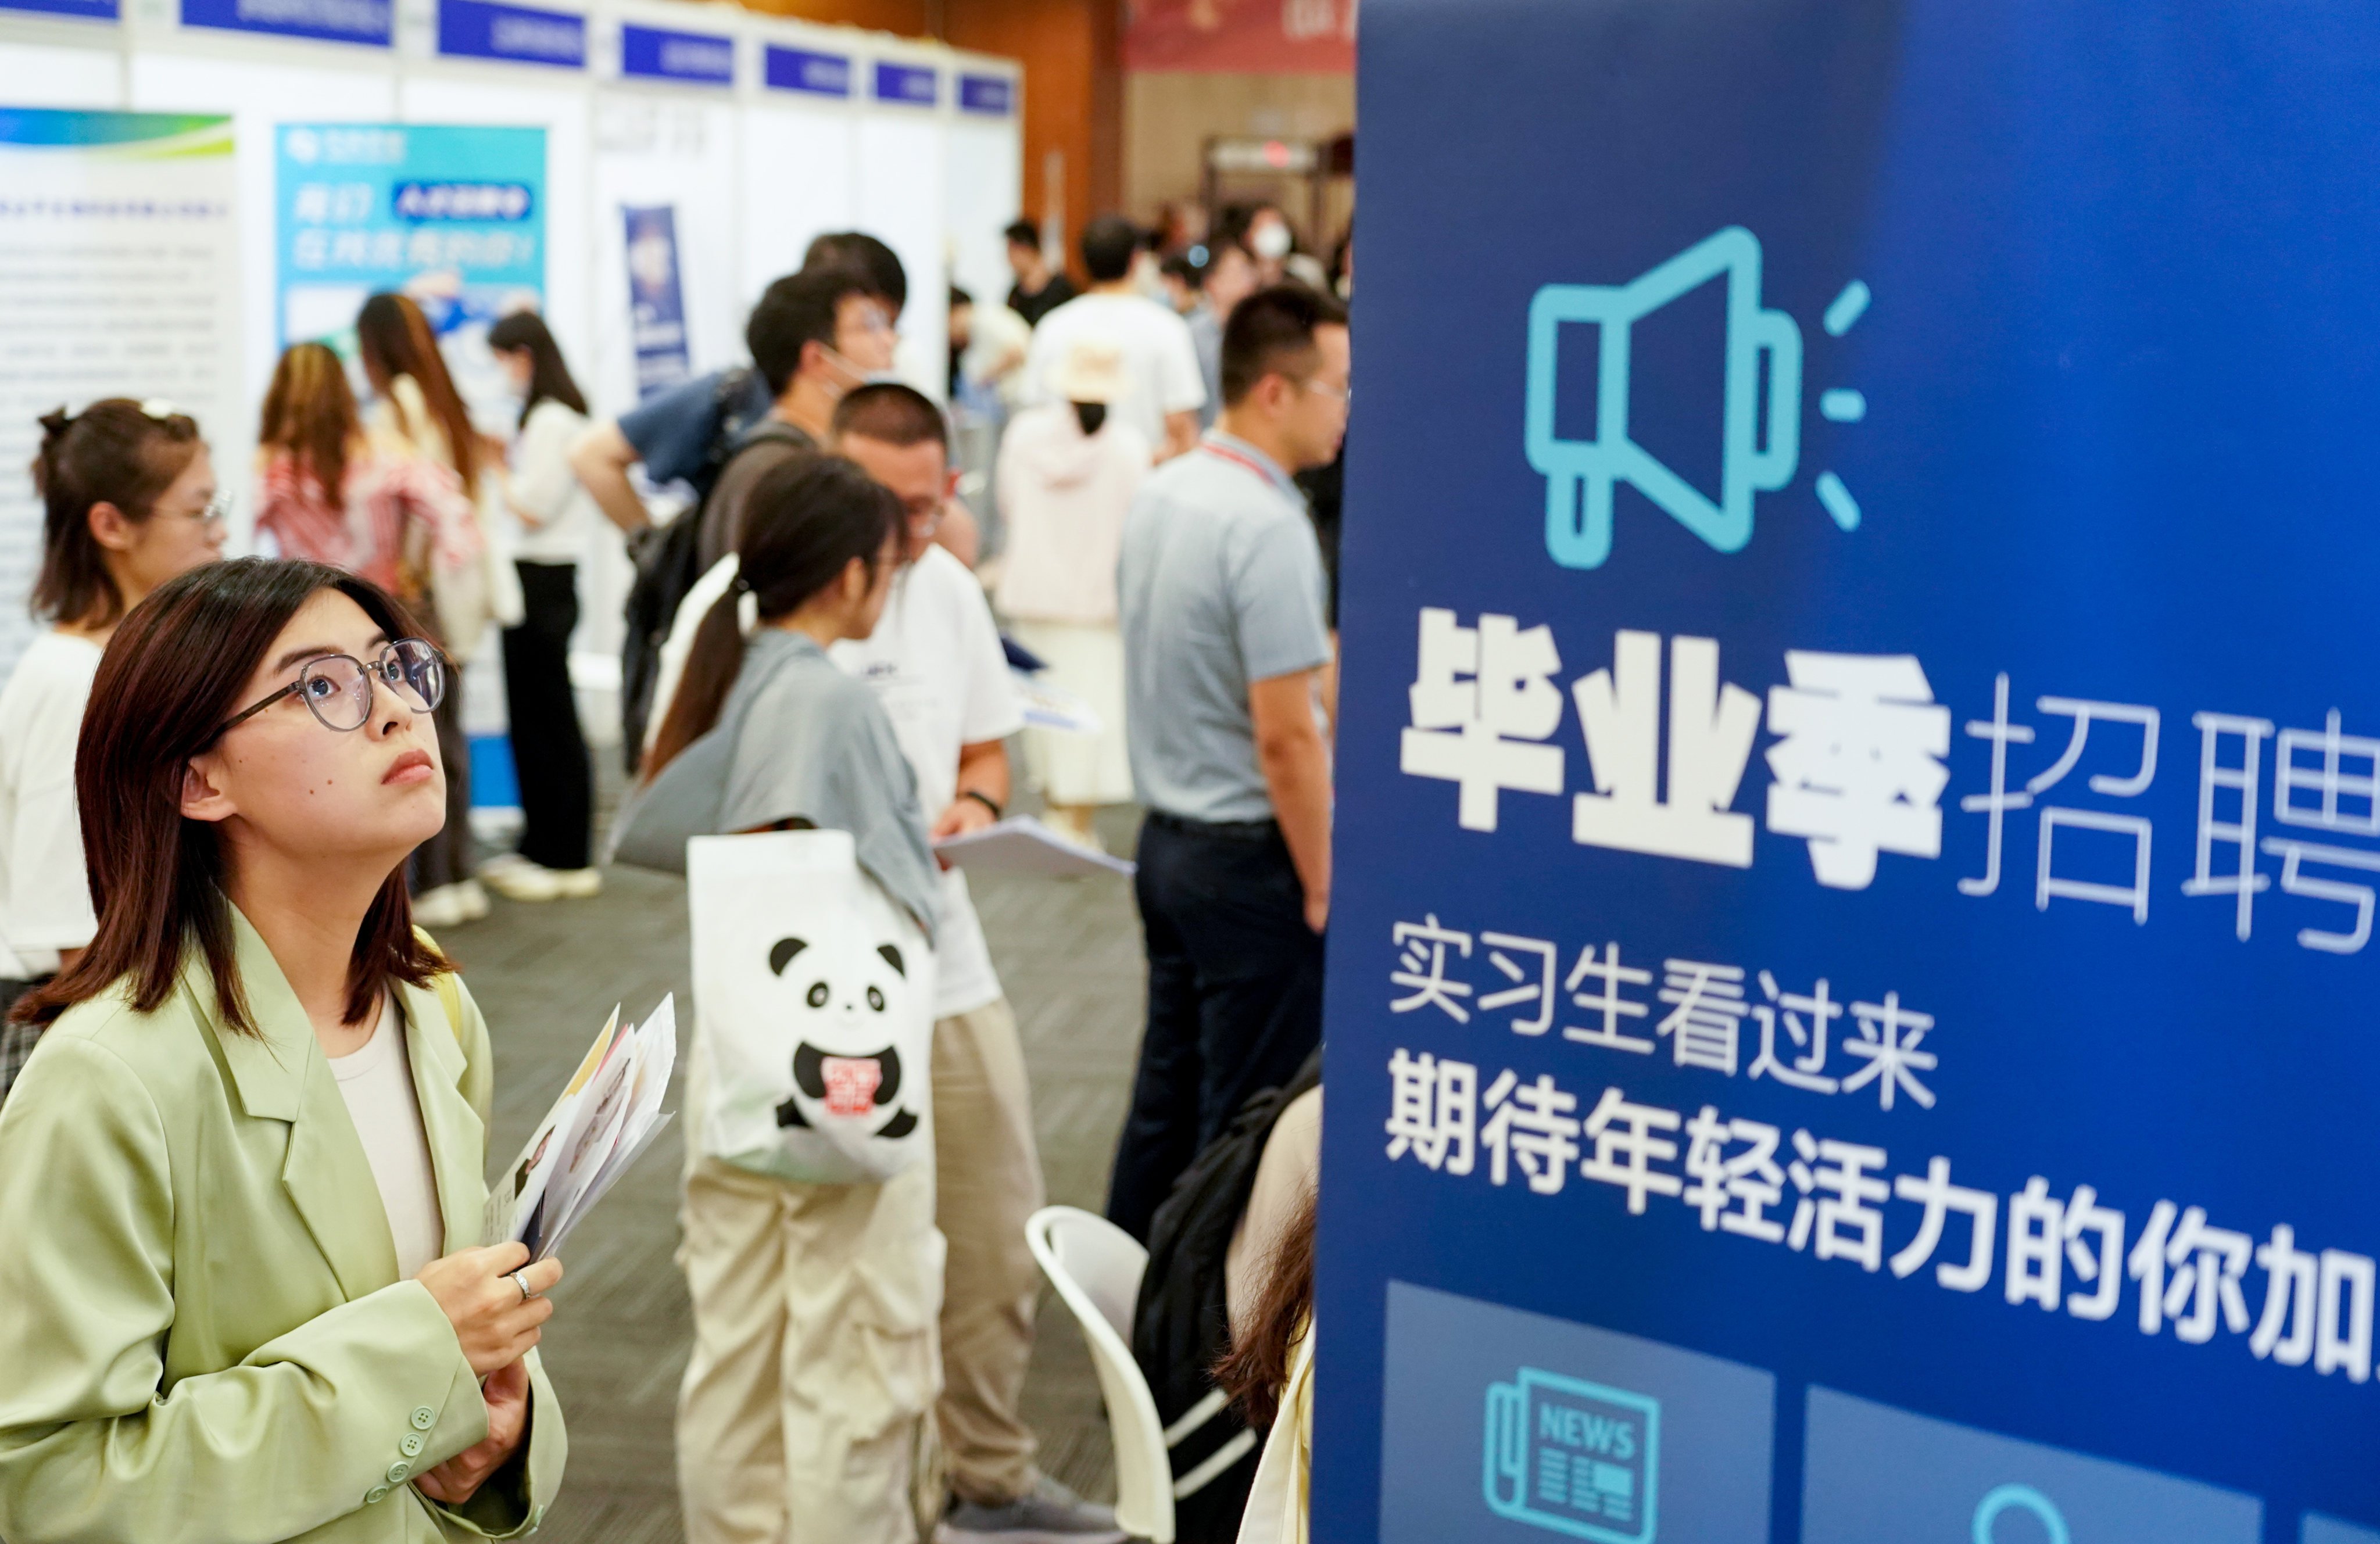 A Beijing job fair for university graduates on July 24. Disruptive innovations like AI are drivers of sustained economic growth, but they also destroy existing economic actors like specific industries, companies and jobs. Photo: Xinhua